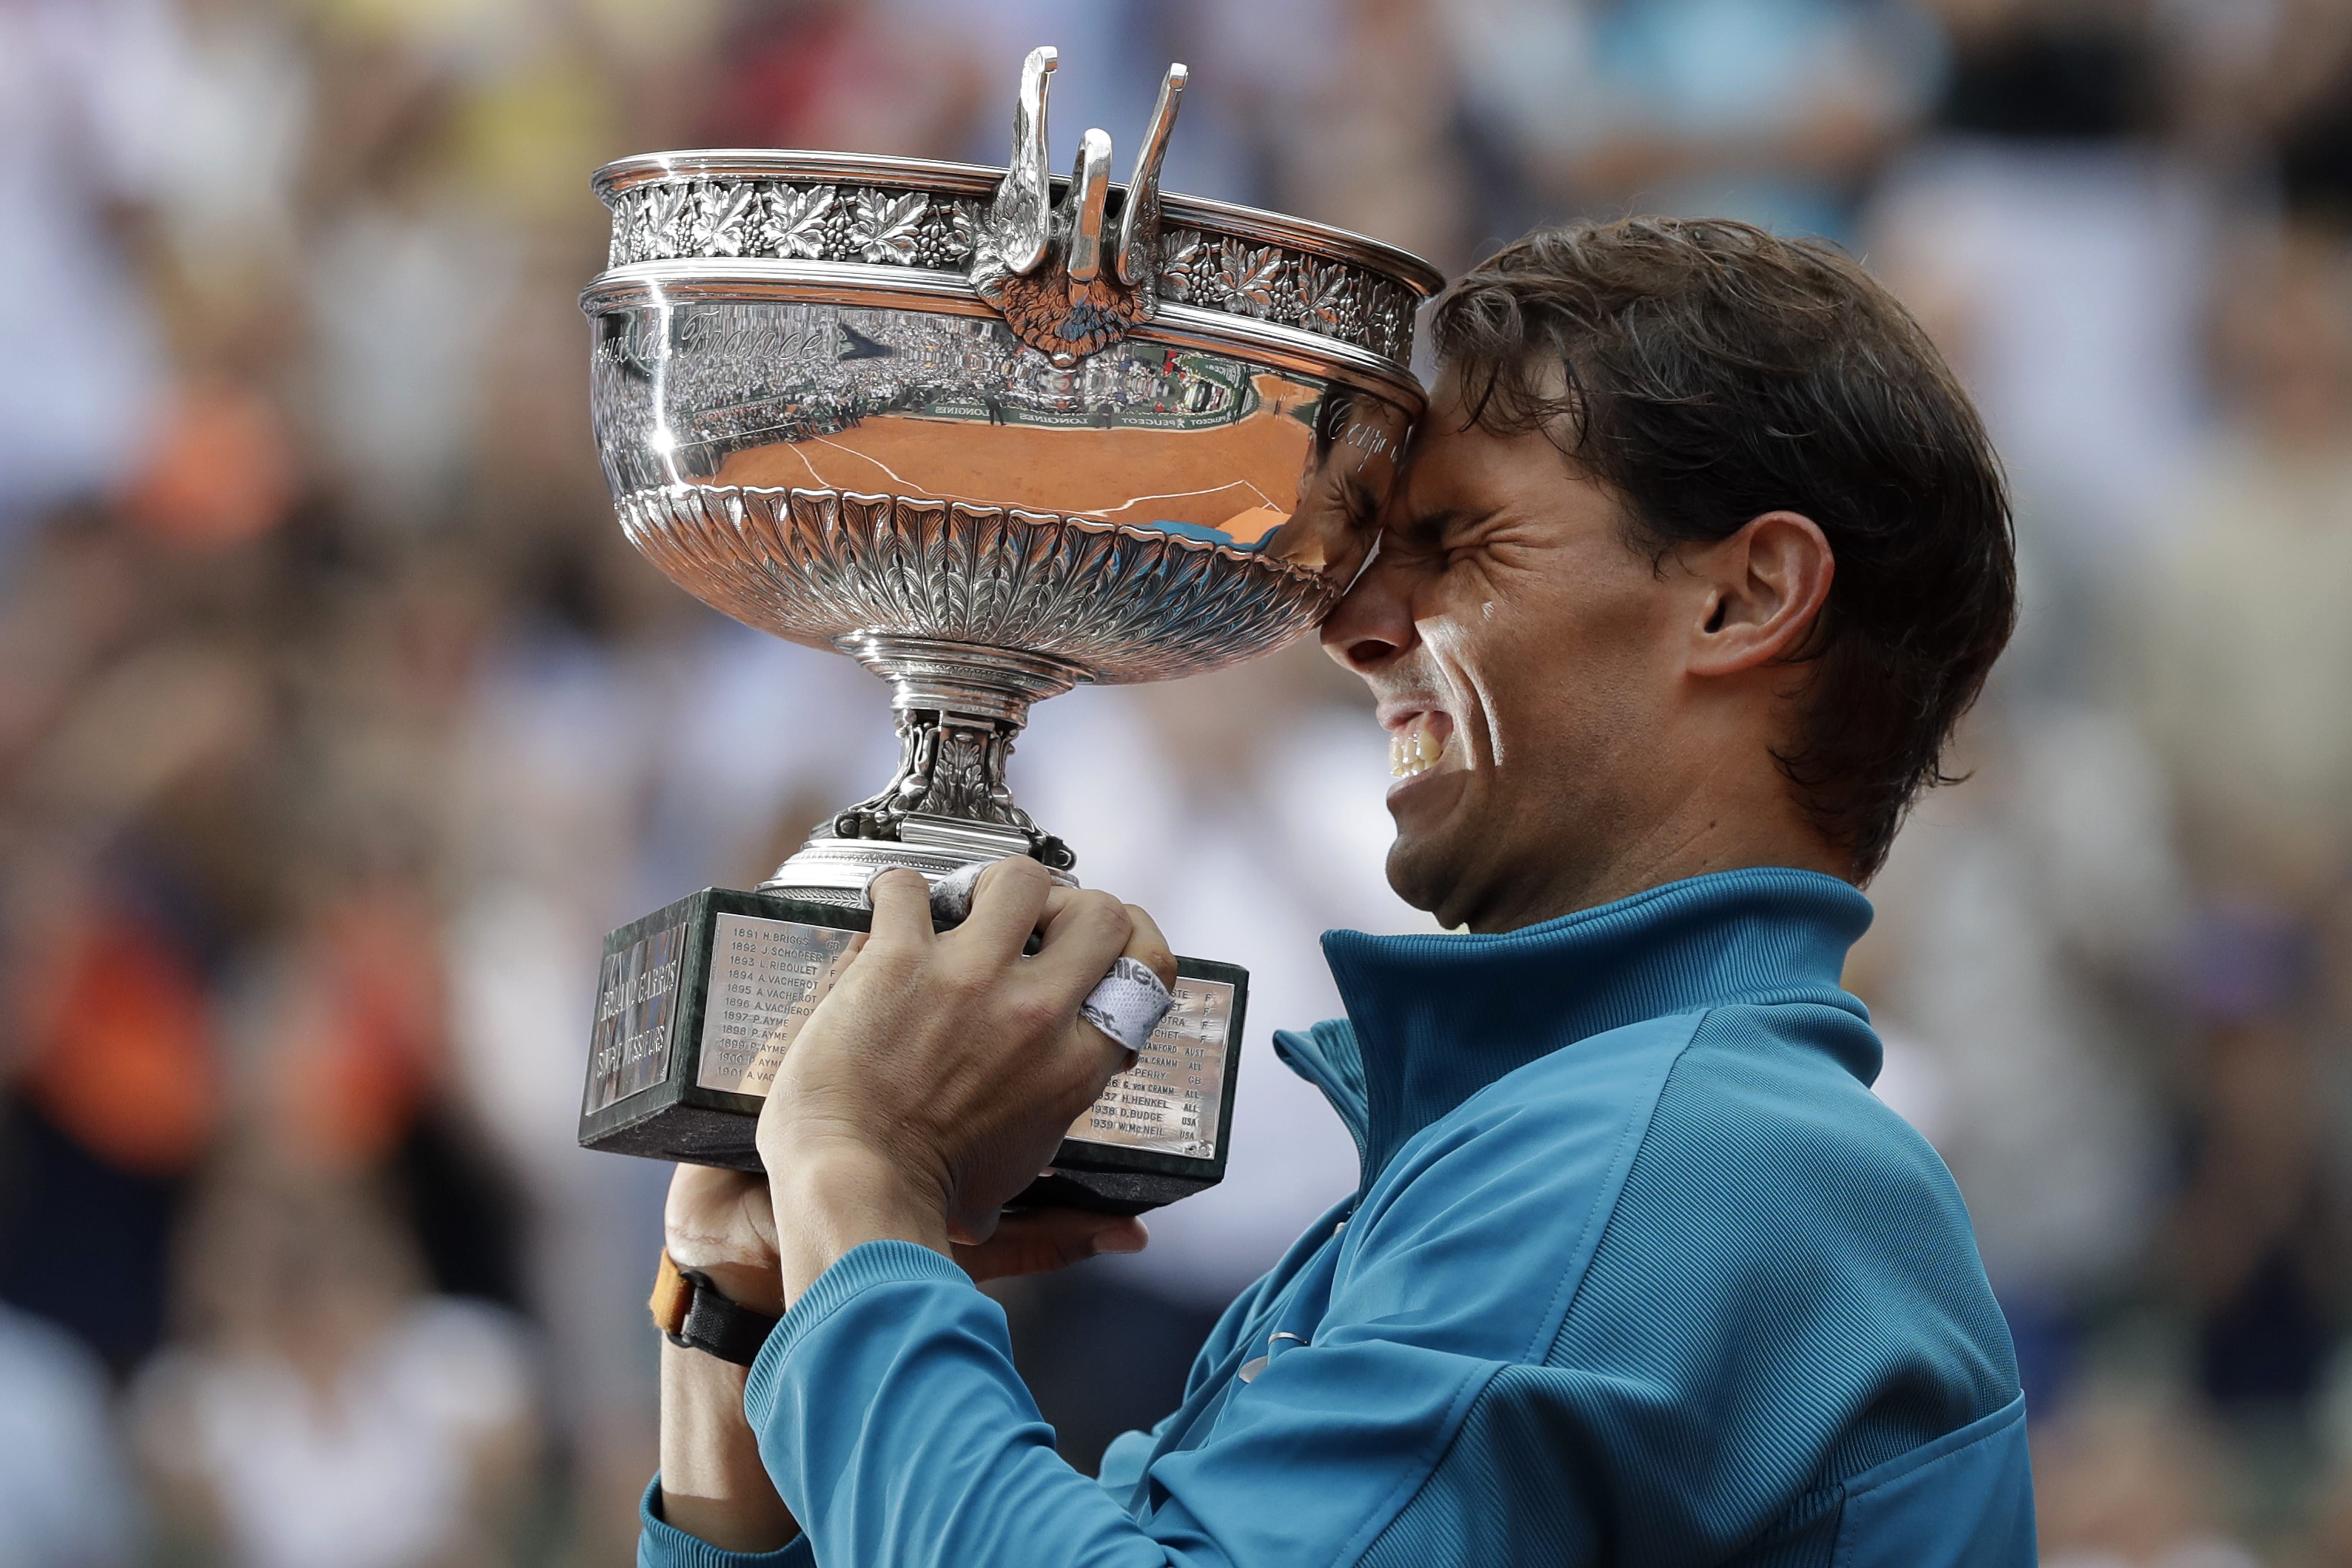 Spain's Rafael Nadal holds the trophy as he celebrates winning the men's final match of the French Open tennis tournament against Austria's Dominic Thiem in three sets 6-4, 6-3, 6-2, at the Roland Garros stadium in Paris, France, Sunday, June 10, 2018.